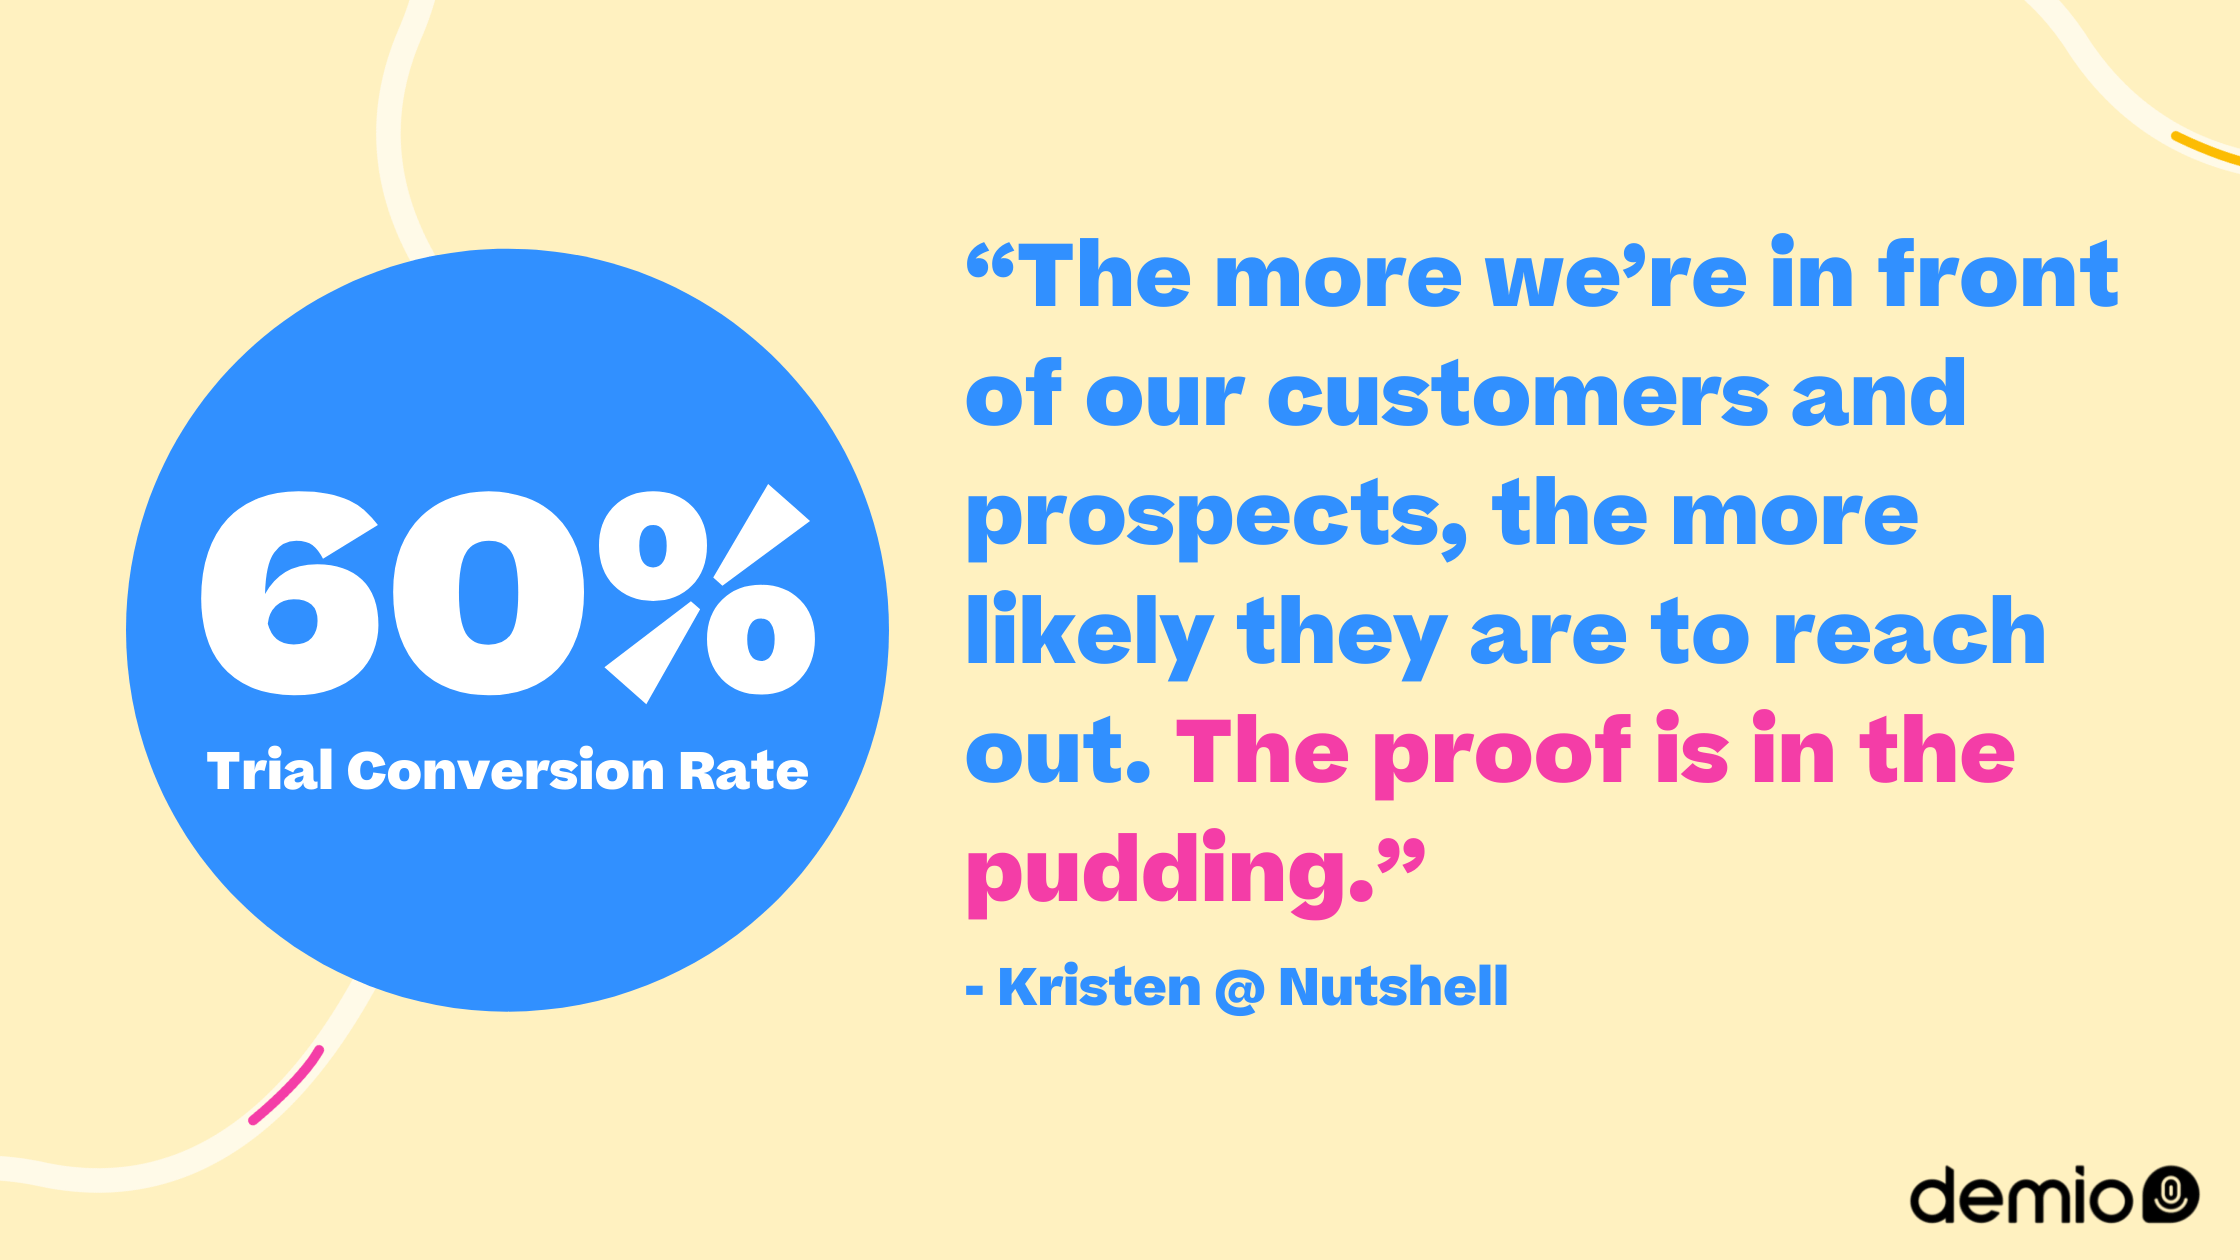 Nutshell's 60% trial conversion rate